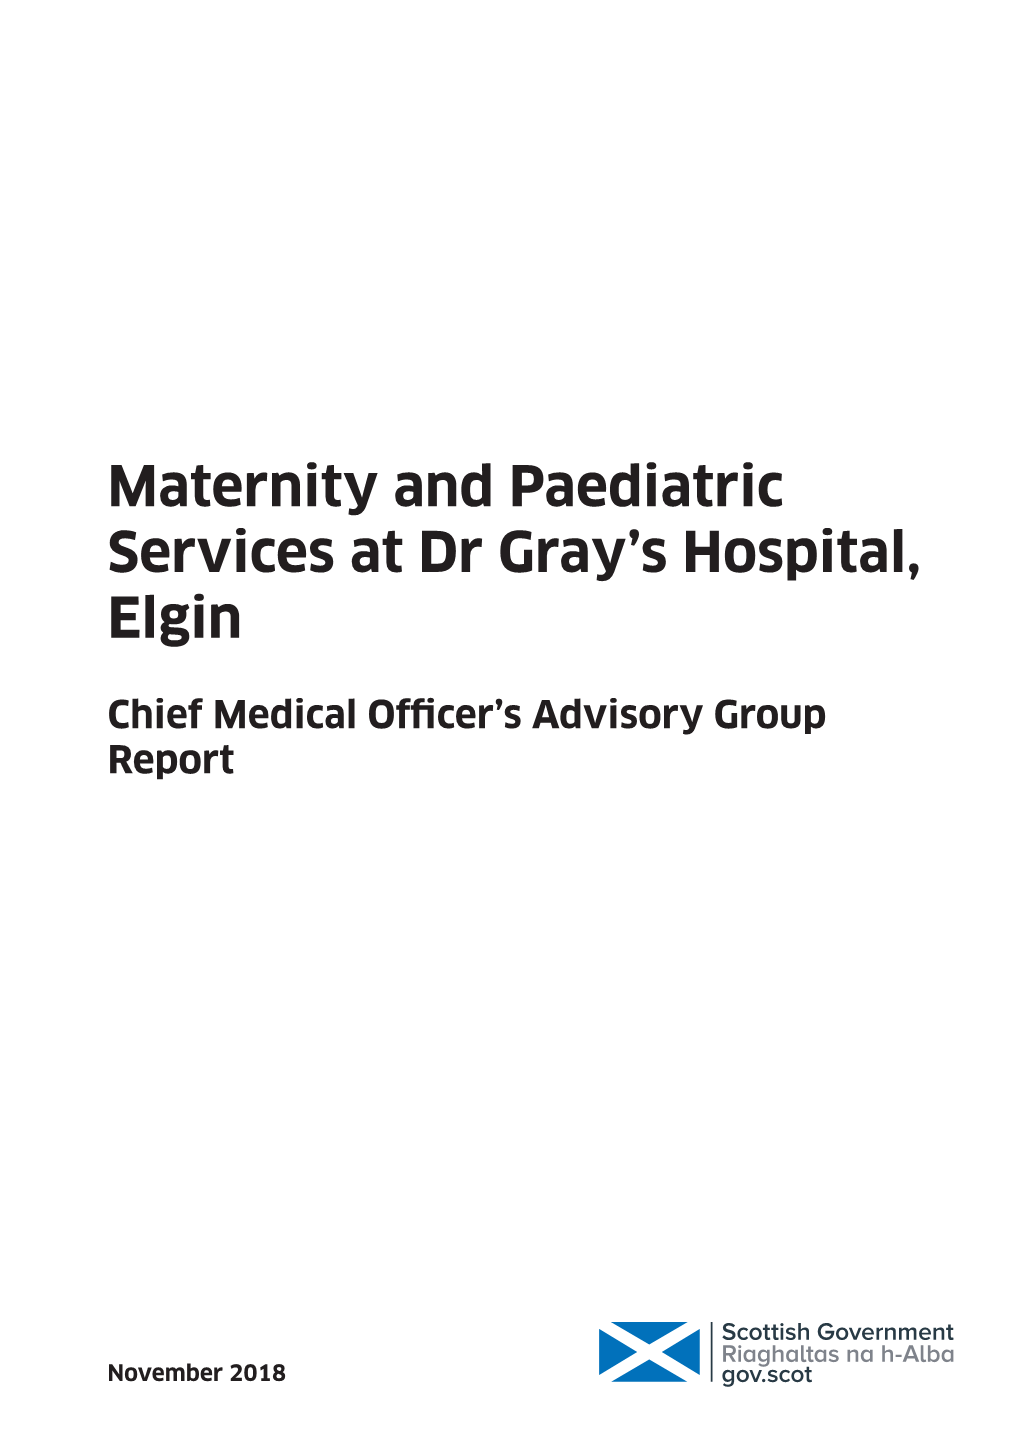 Maternity and Paediatric Services at Dr Gray's Hospital, Elgin: Chief